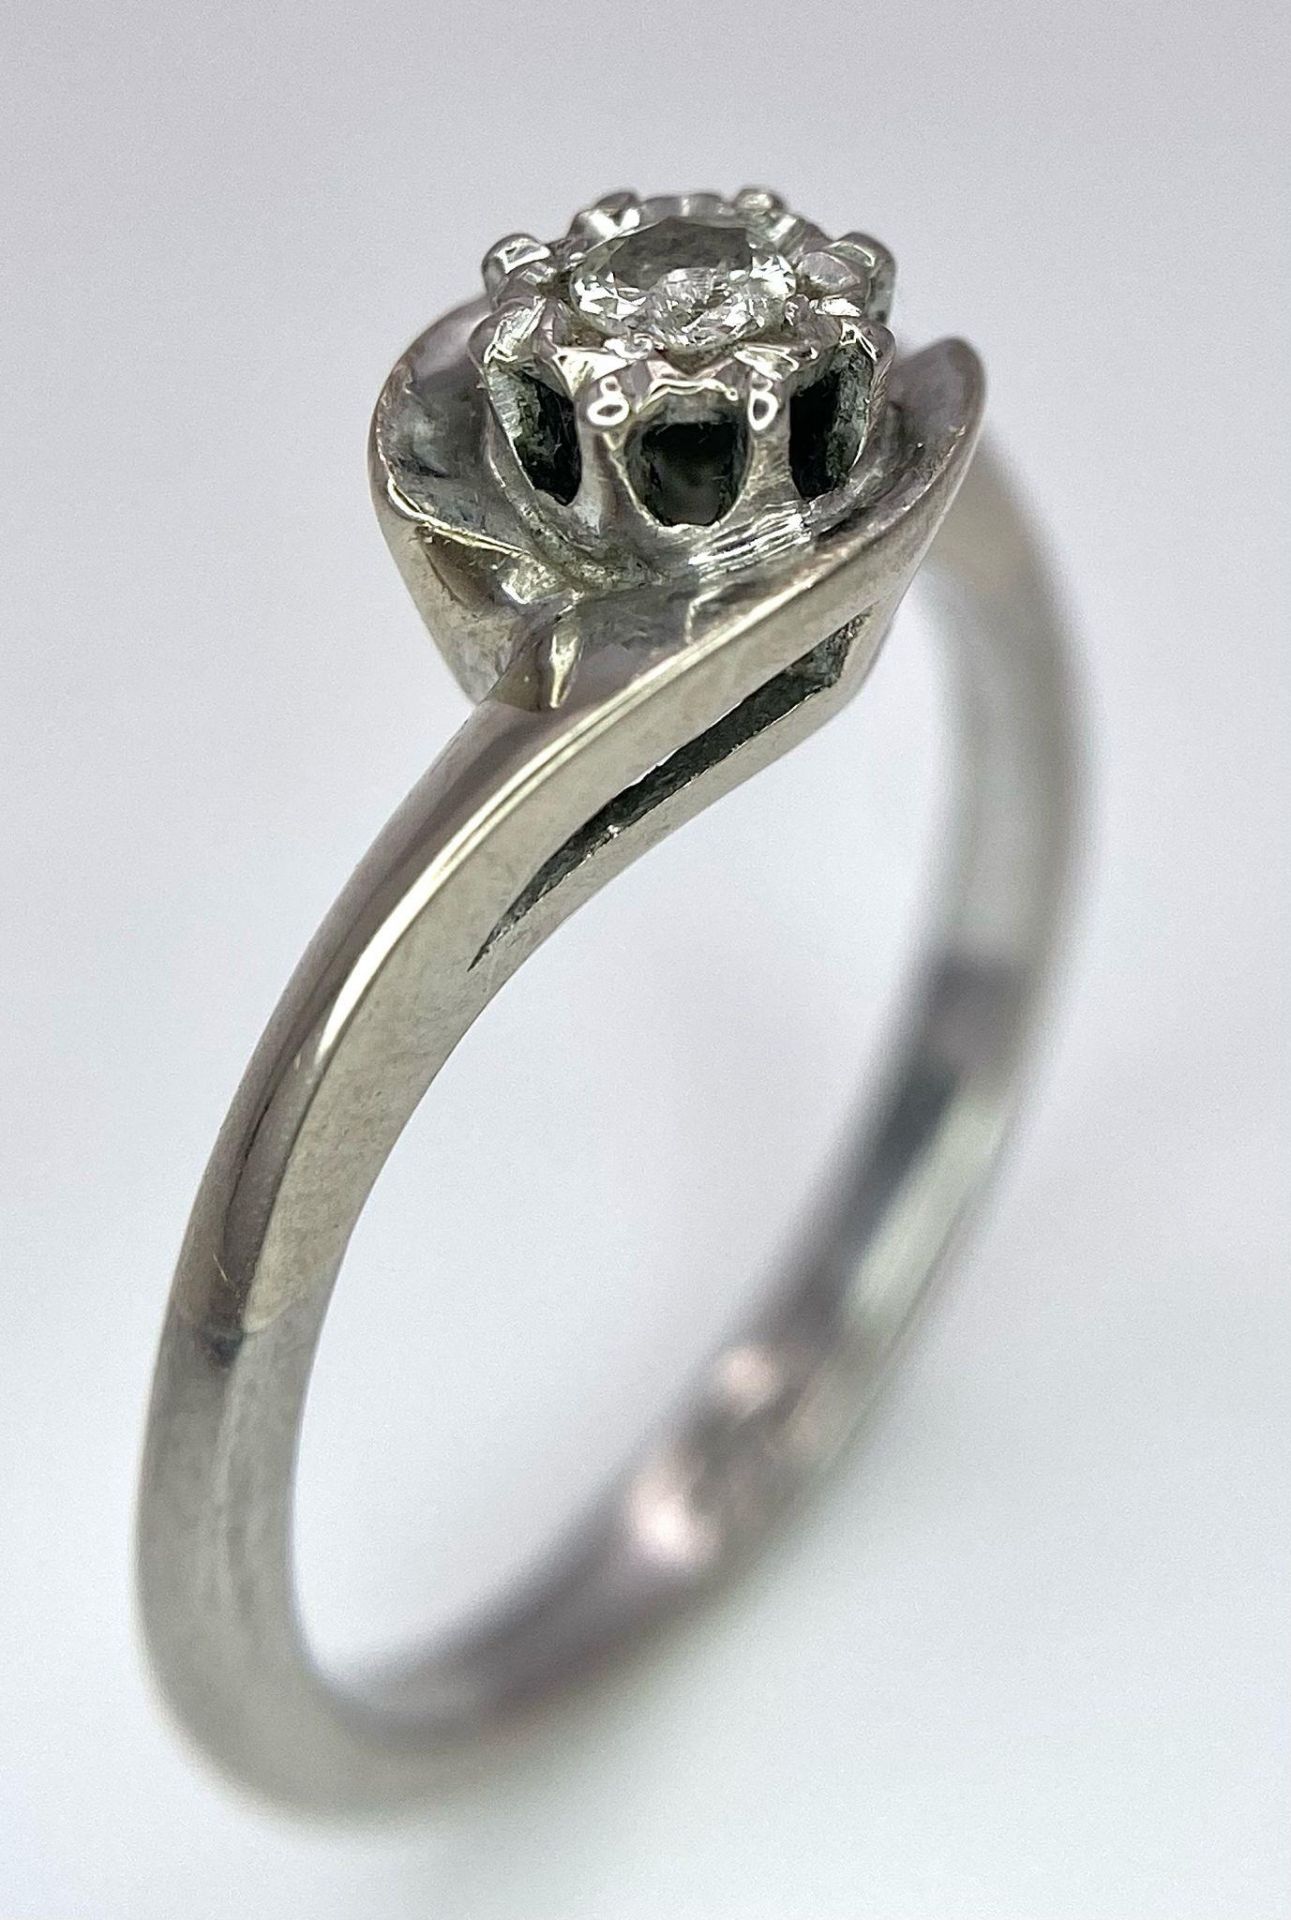 An 18K White Gold Diamond Crossover Ring. 0.10ct brilliant round cut diamond. Size N. 4g total - Image 2 of 6